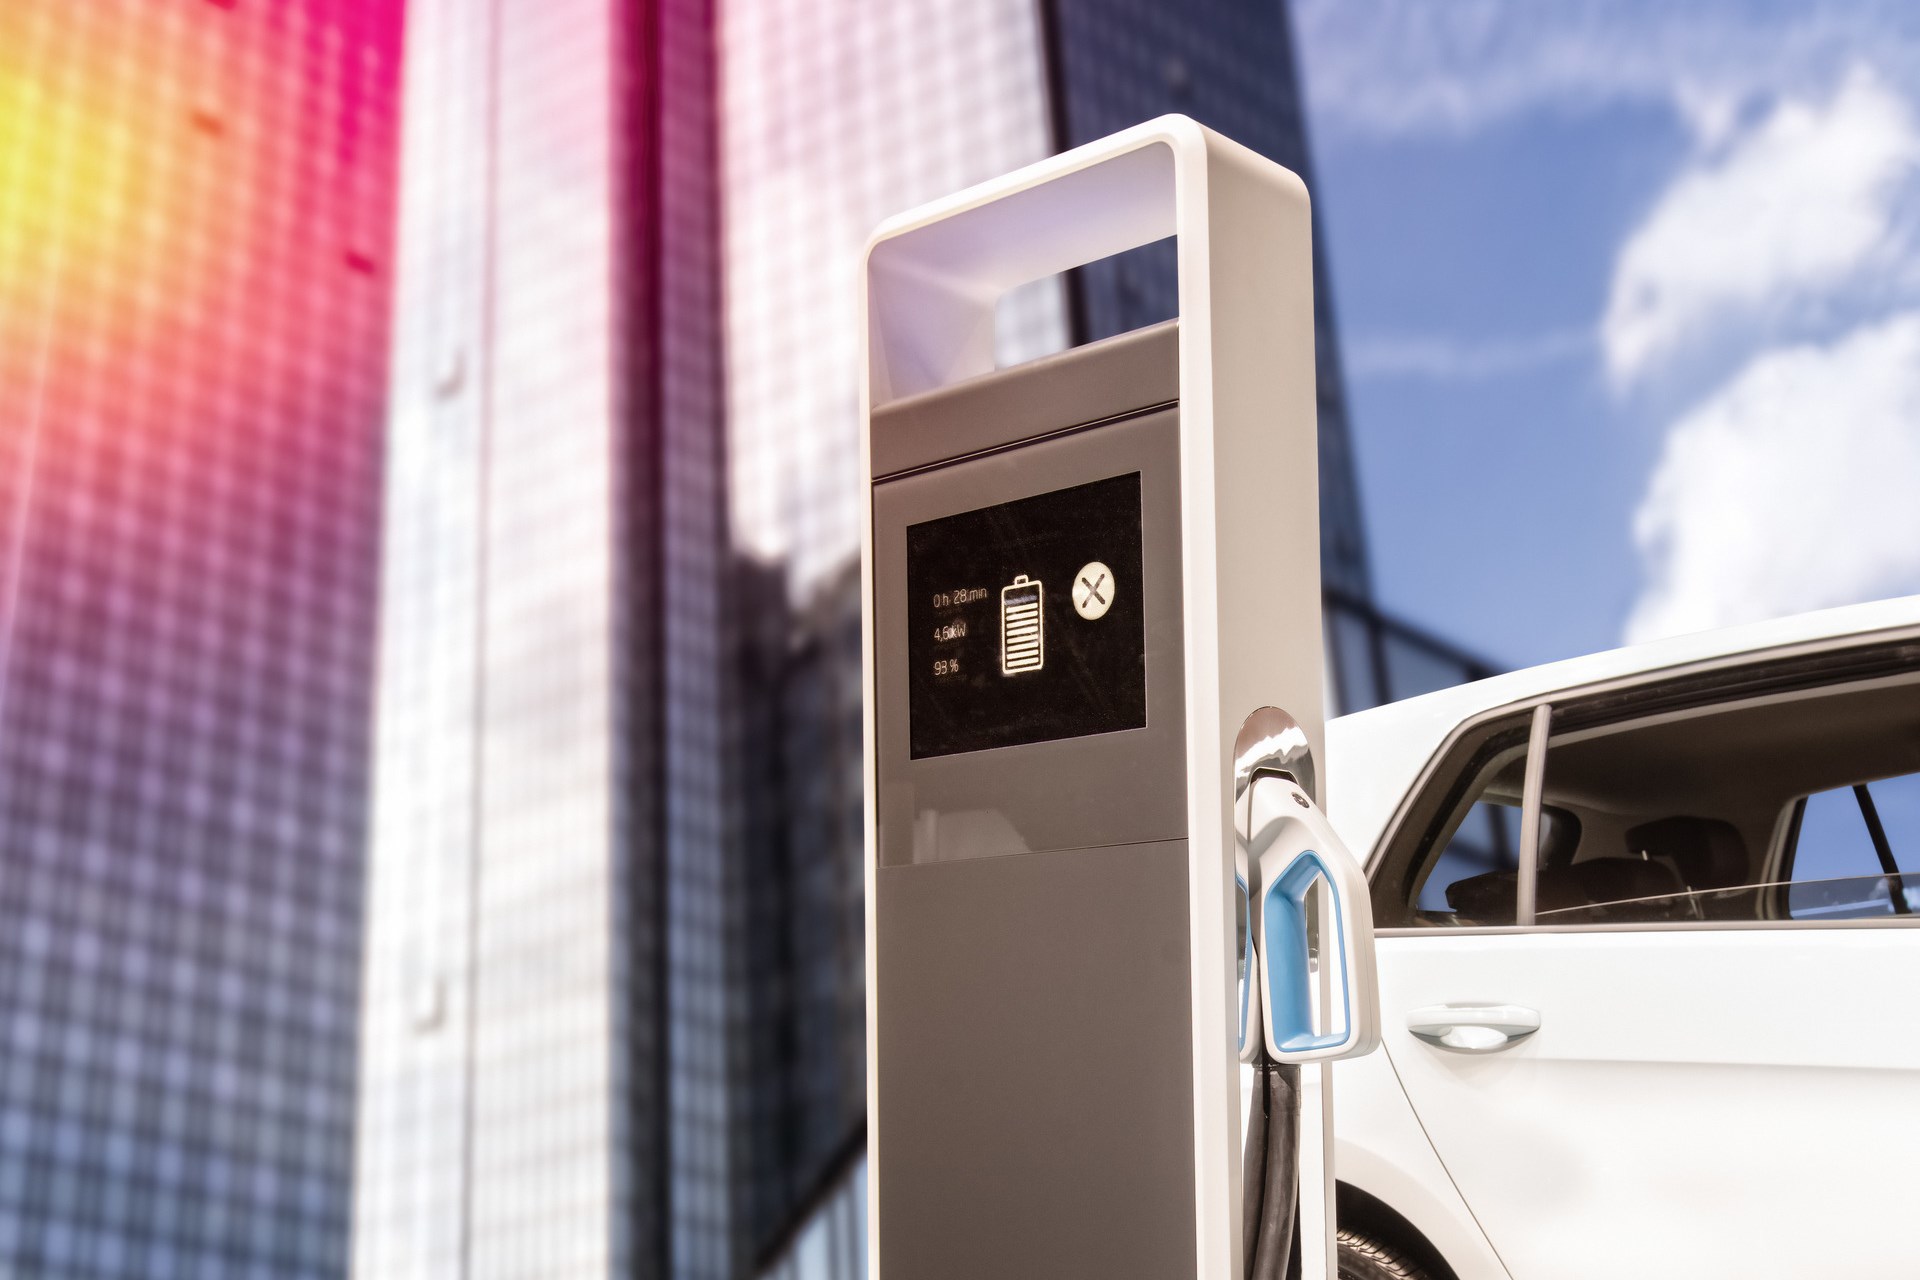 Electric car at a charging station in front of a skyscraper